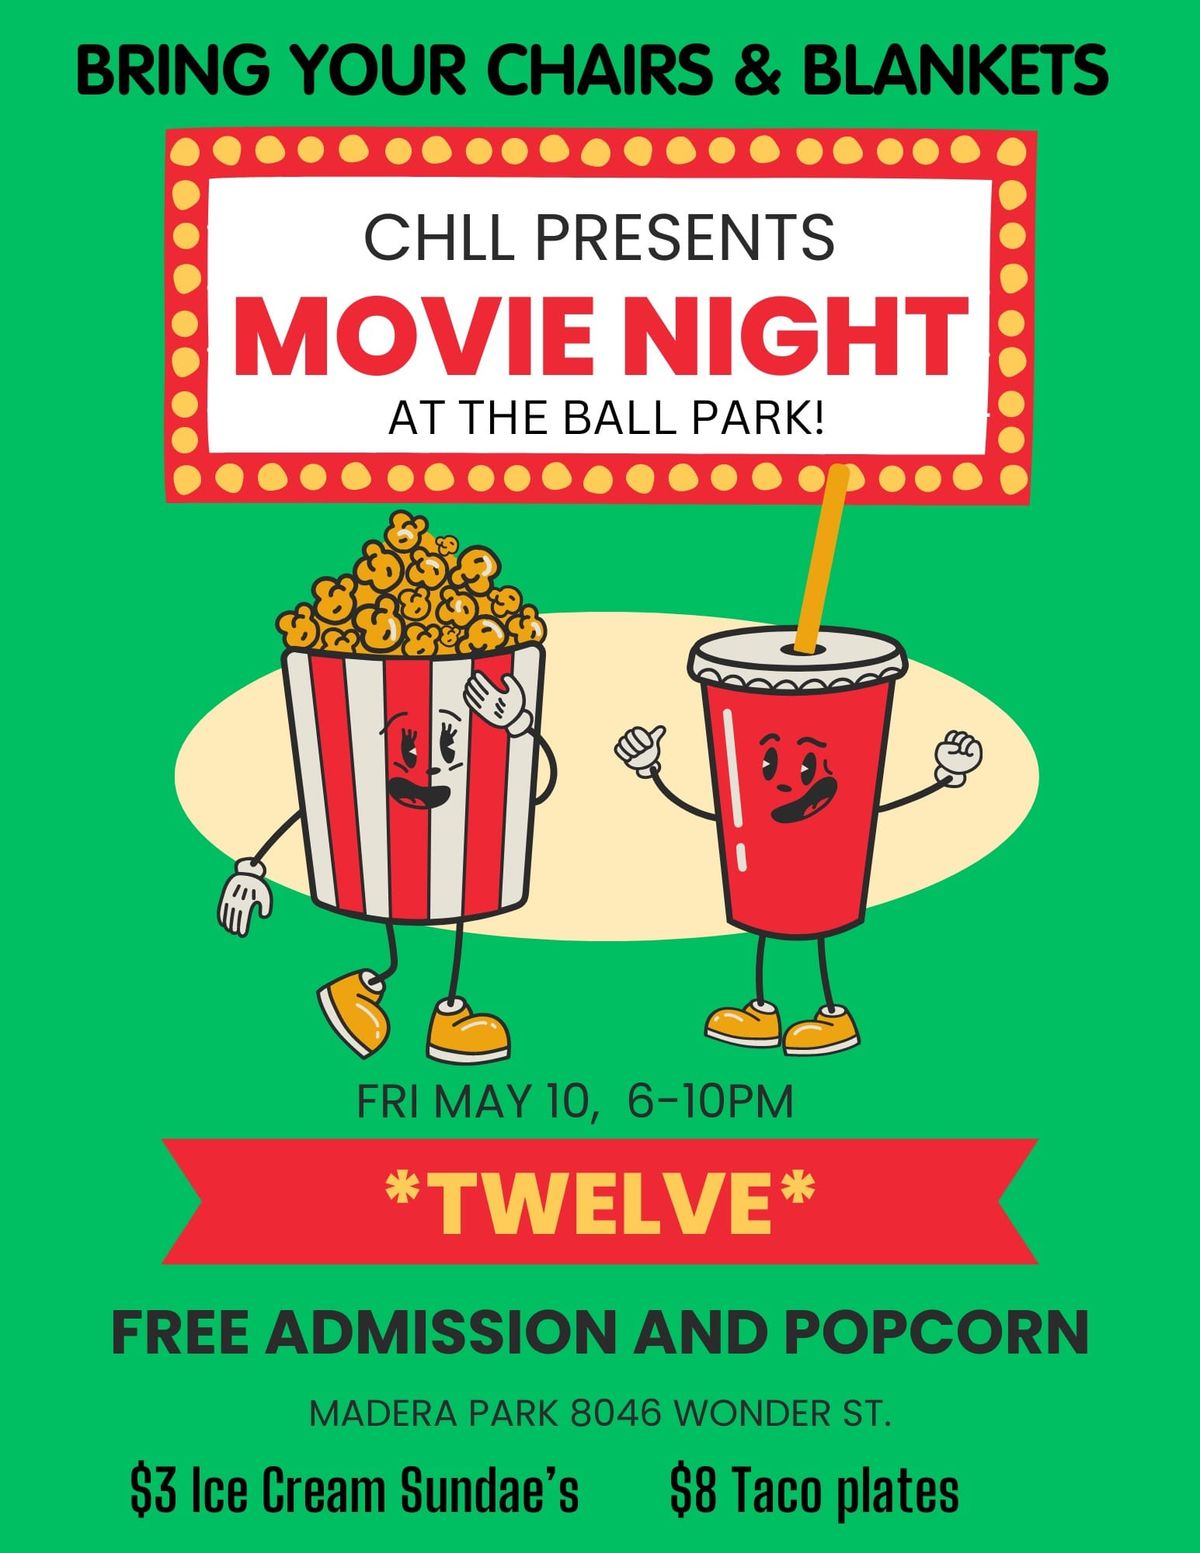 Citrus Heights Little League Annual Family Movie Night